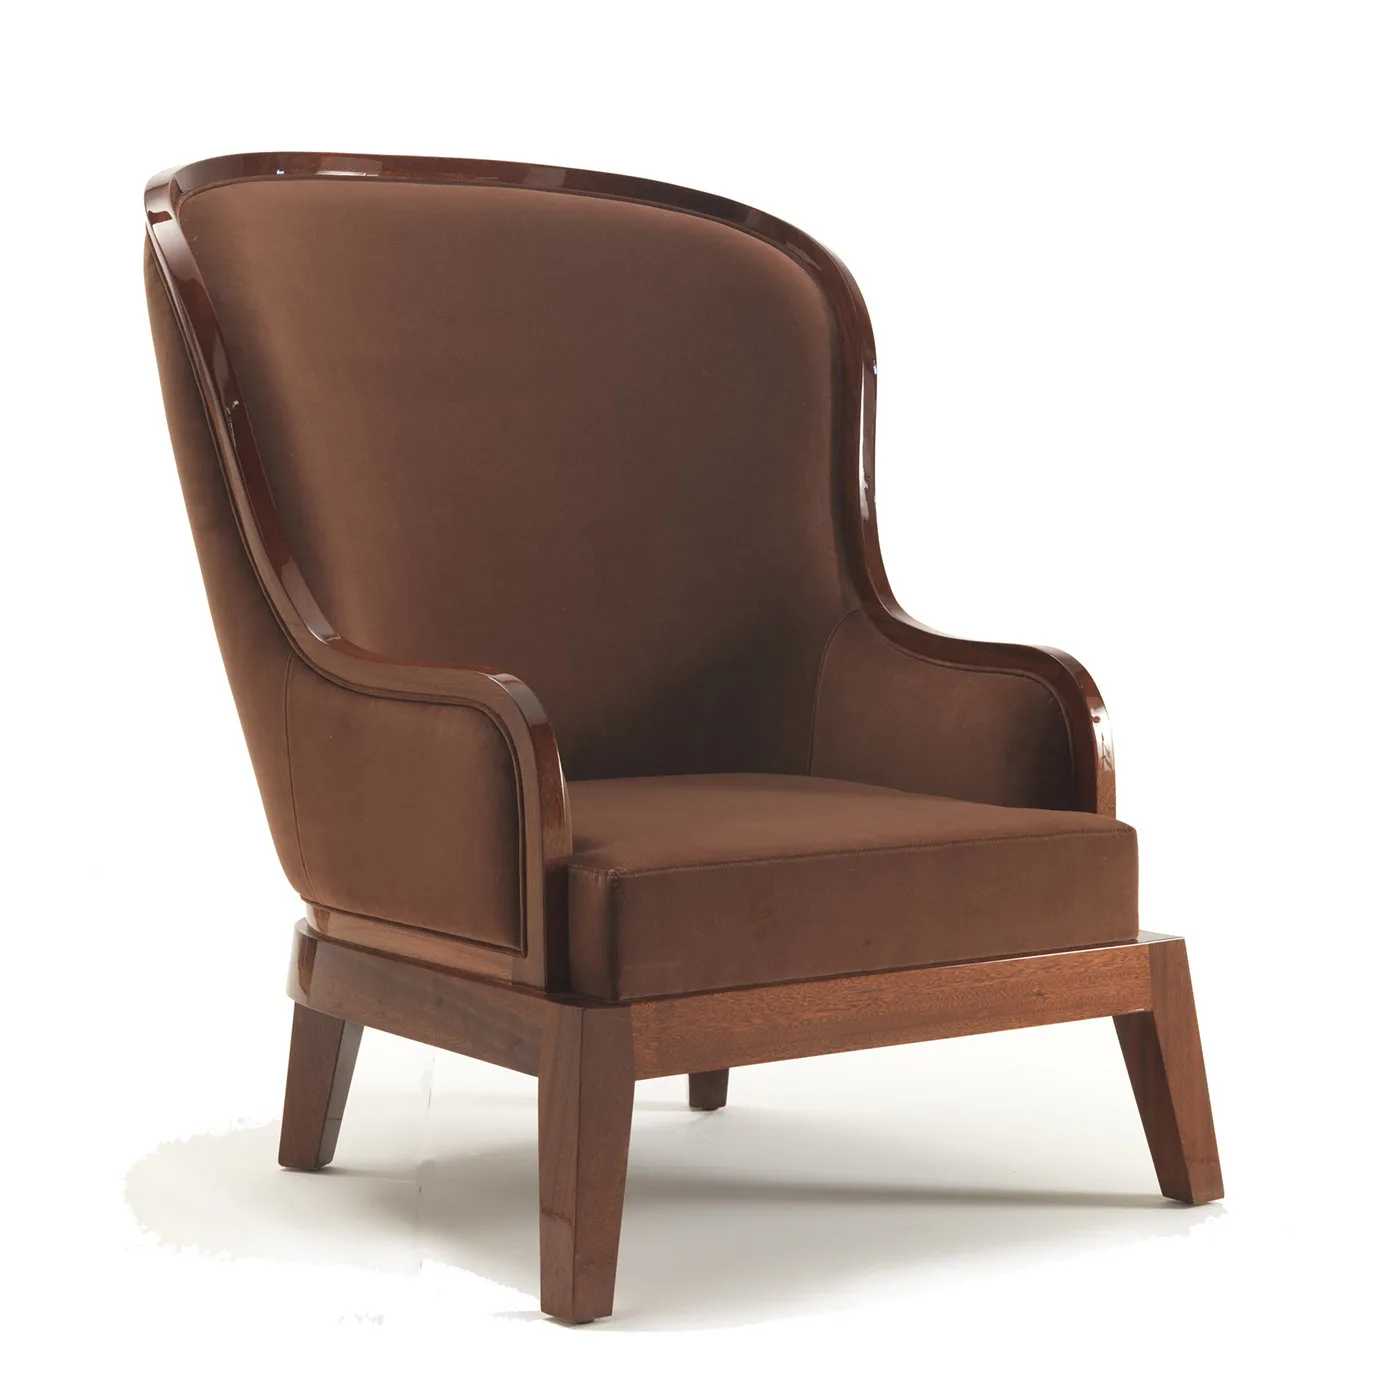 CURZON ARMCHAIR BY ARCHER HUMPHRYES ARCHITECTS